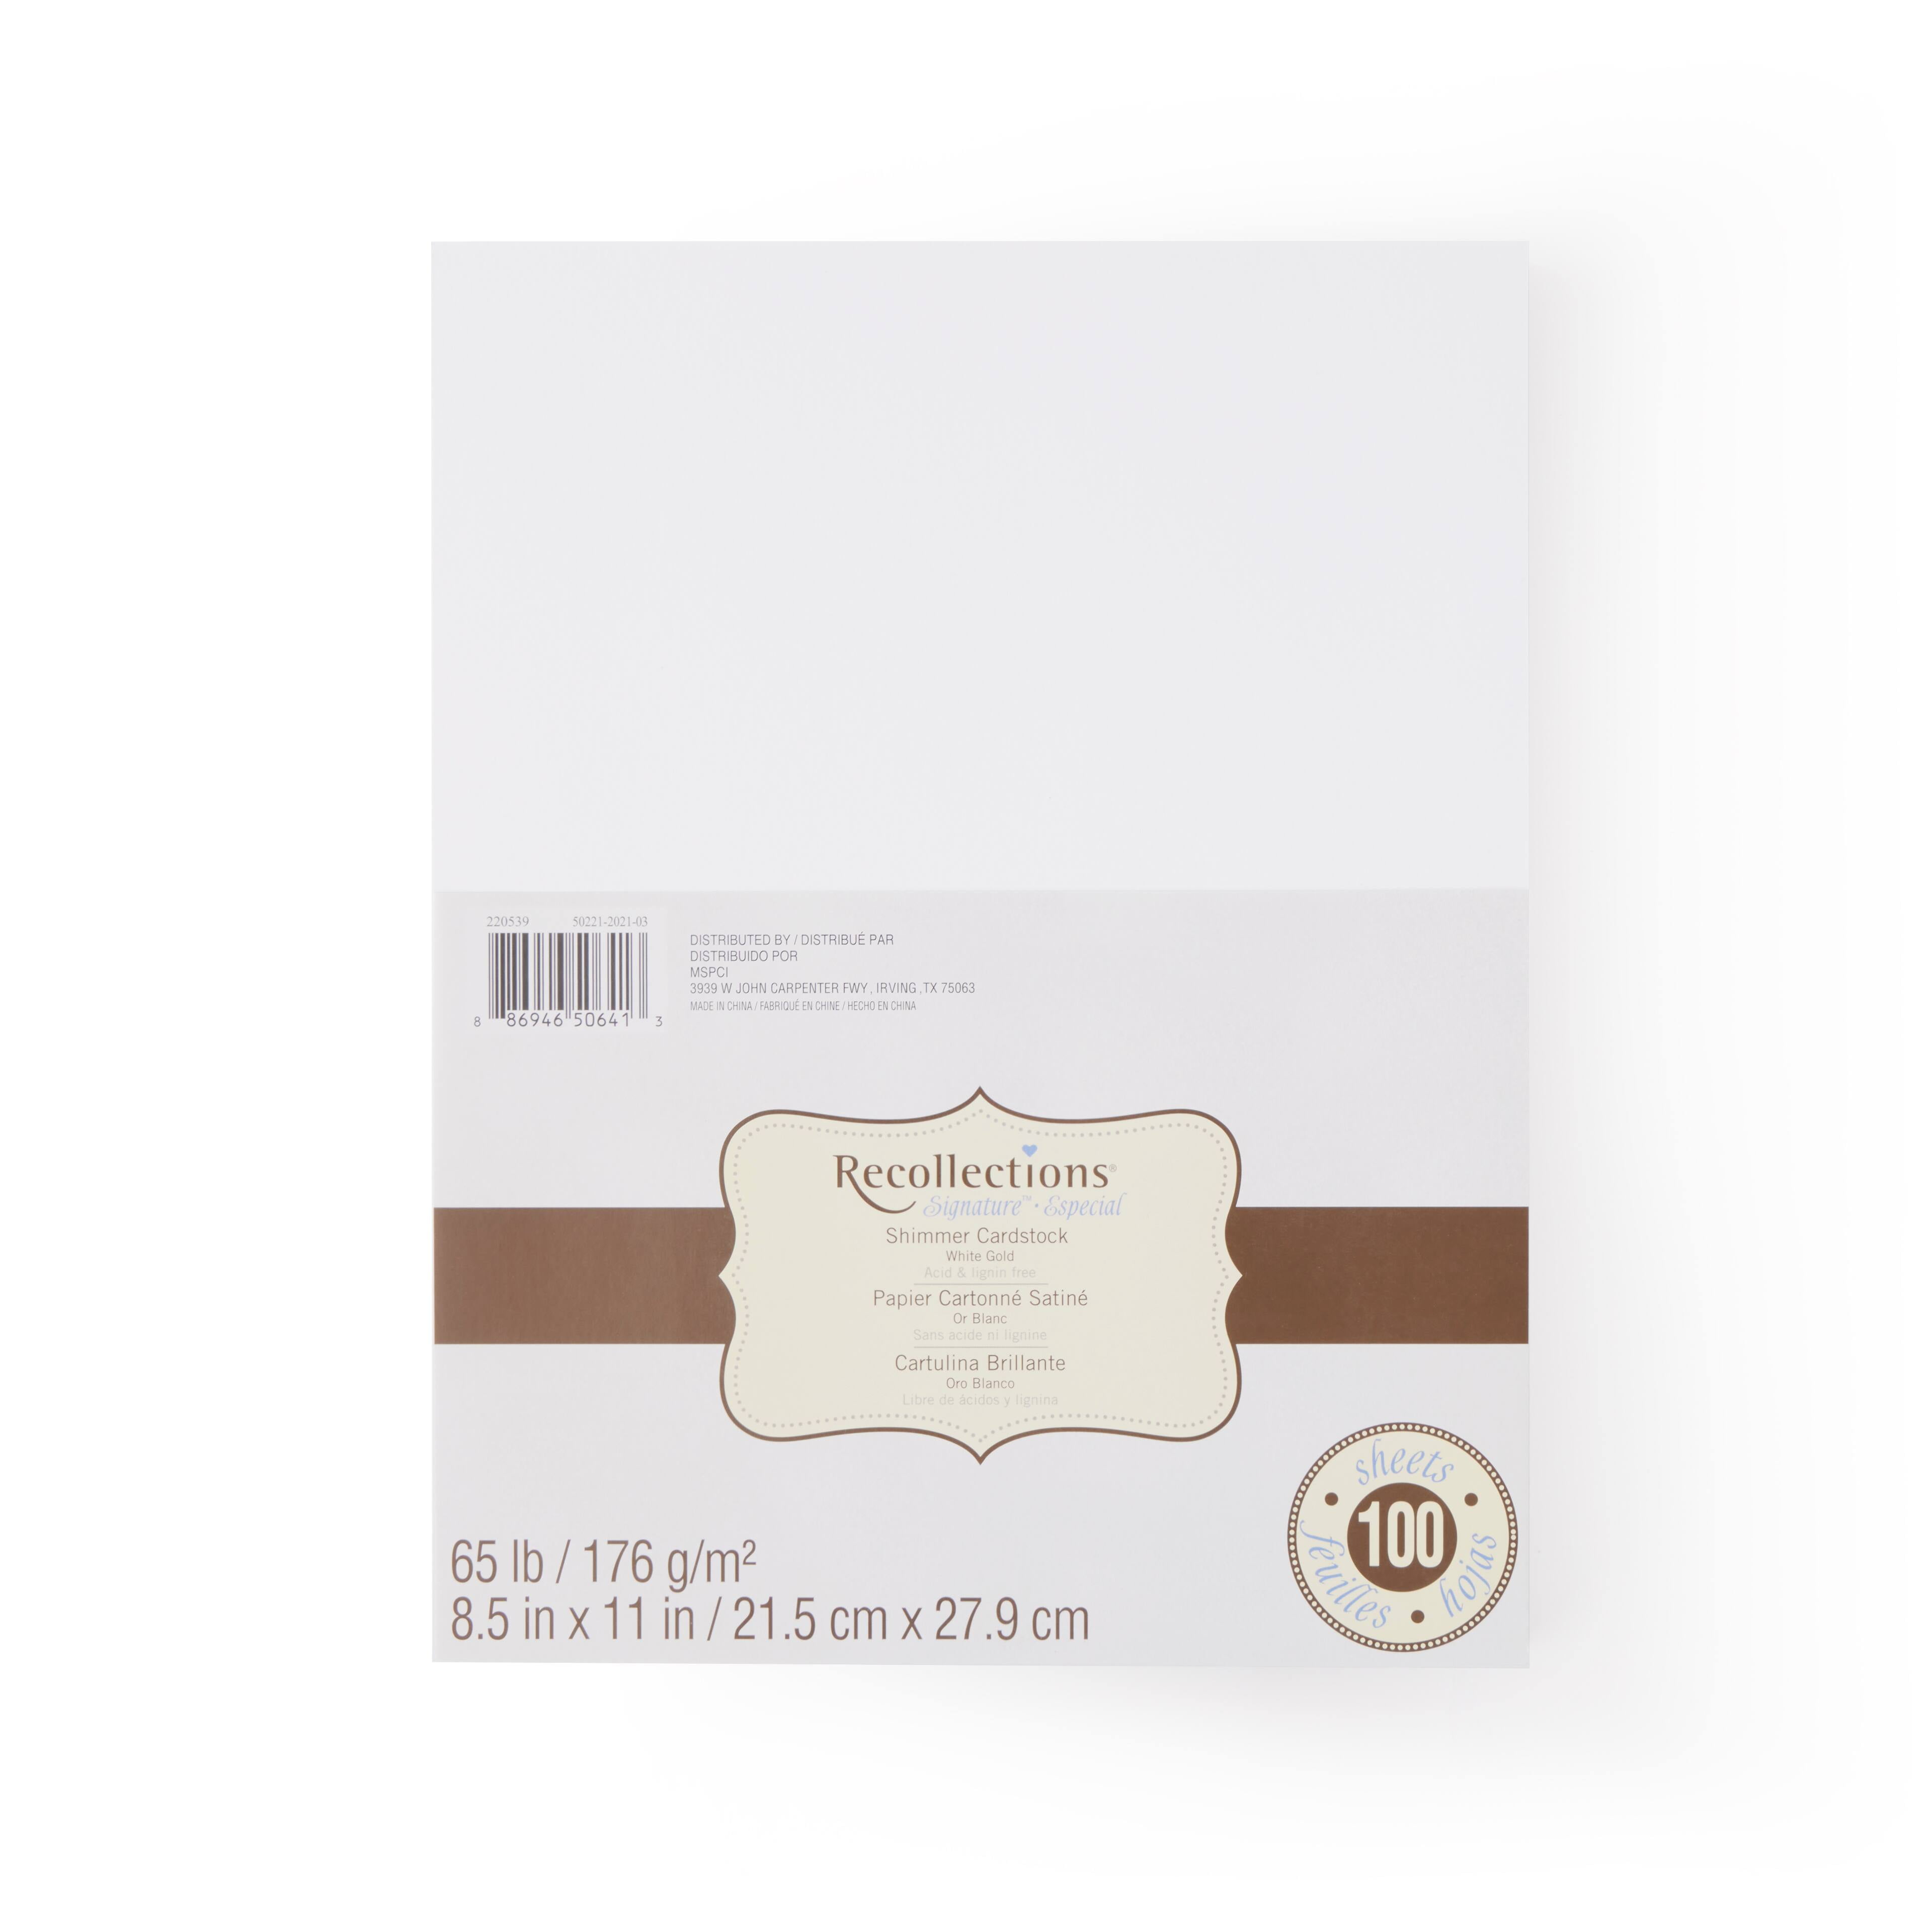 RECOLLECTIONS CARDSTOCK Paper 8 1/2 x 11 100 Sheets 110 lb